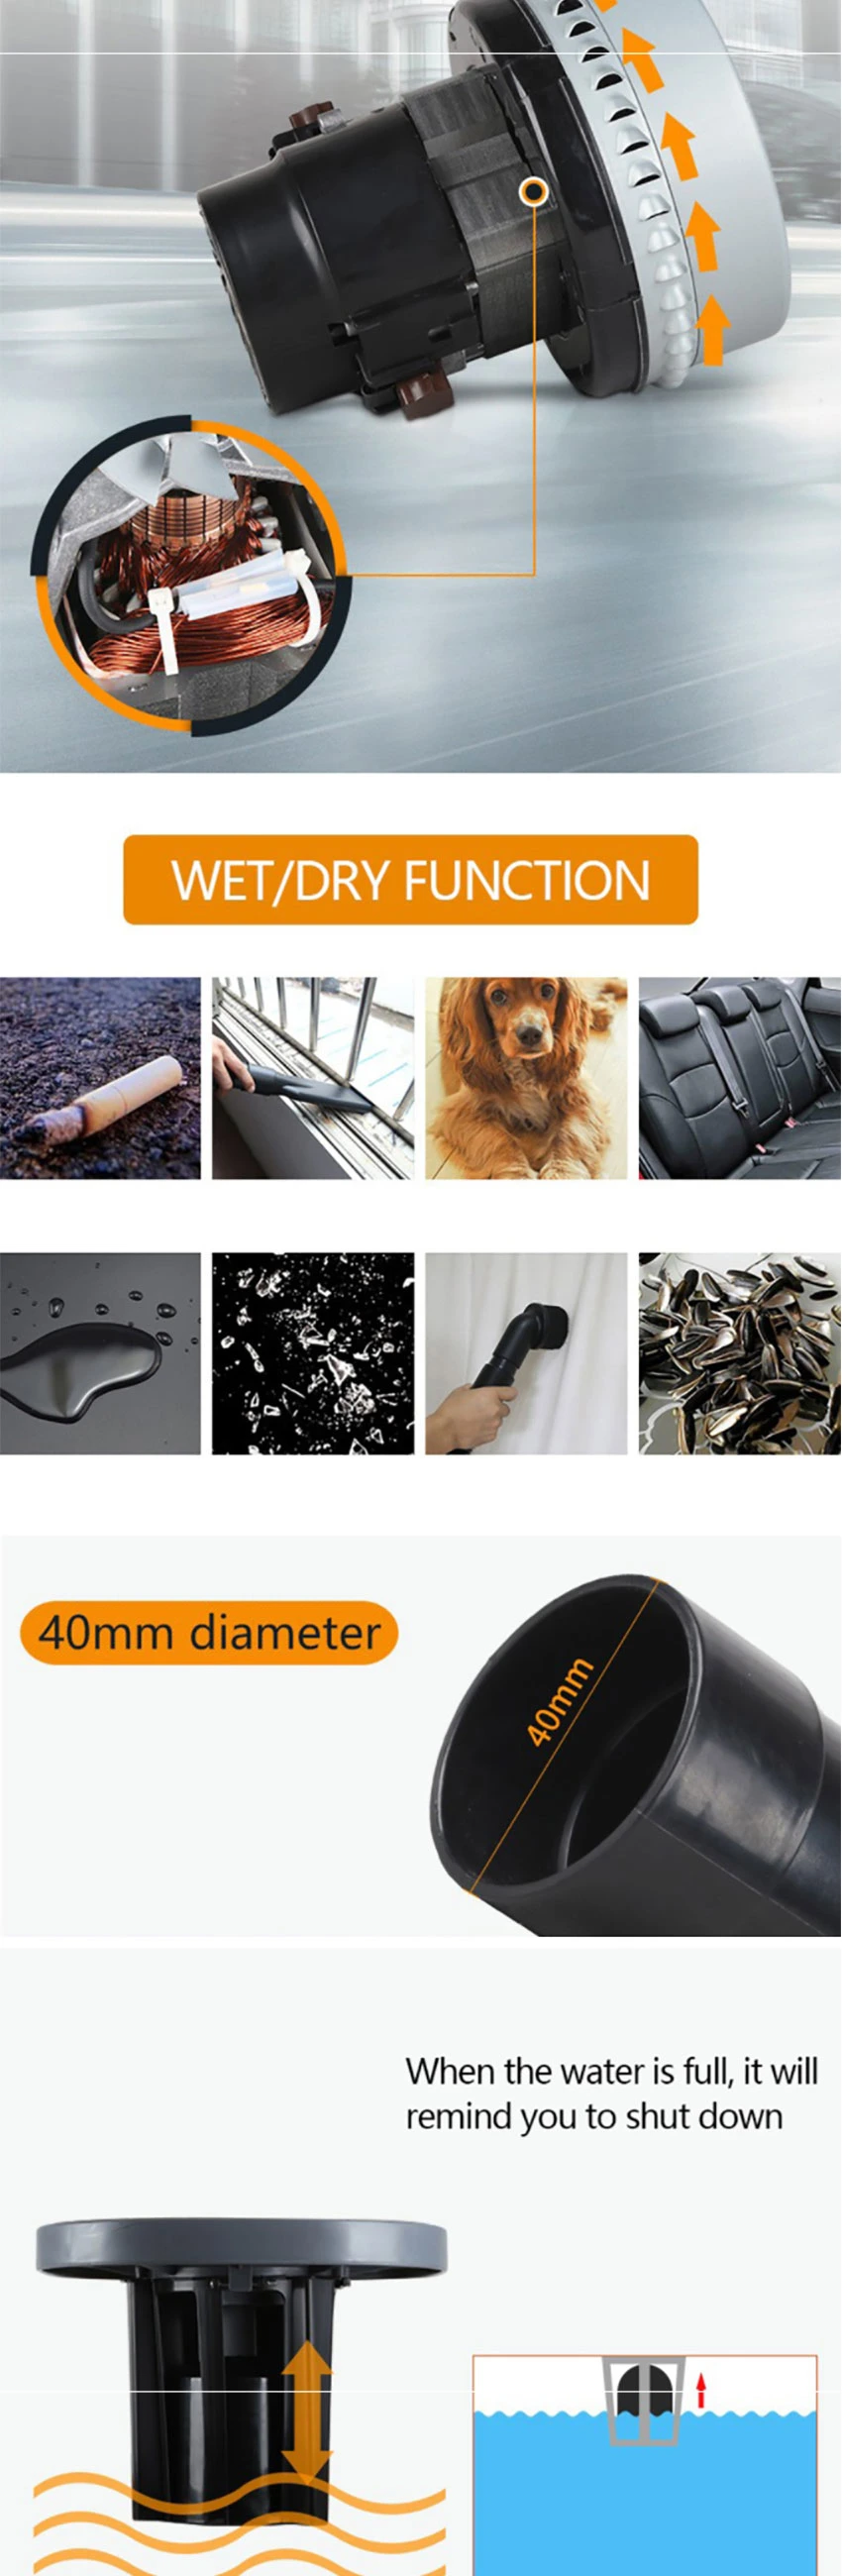 2000W-70L Vacuum Cleaner Series Wet and Dry Blow and Suction Multi-Function Vacuum Cleaner